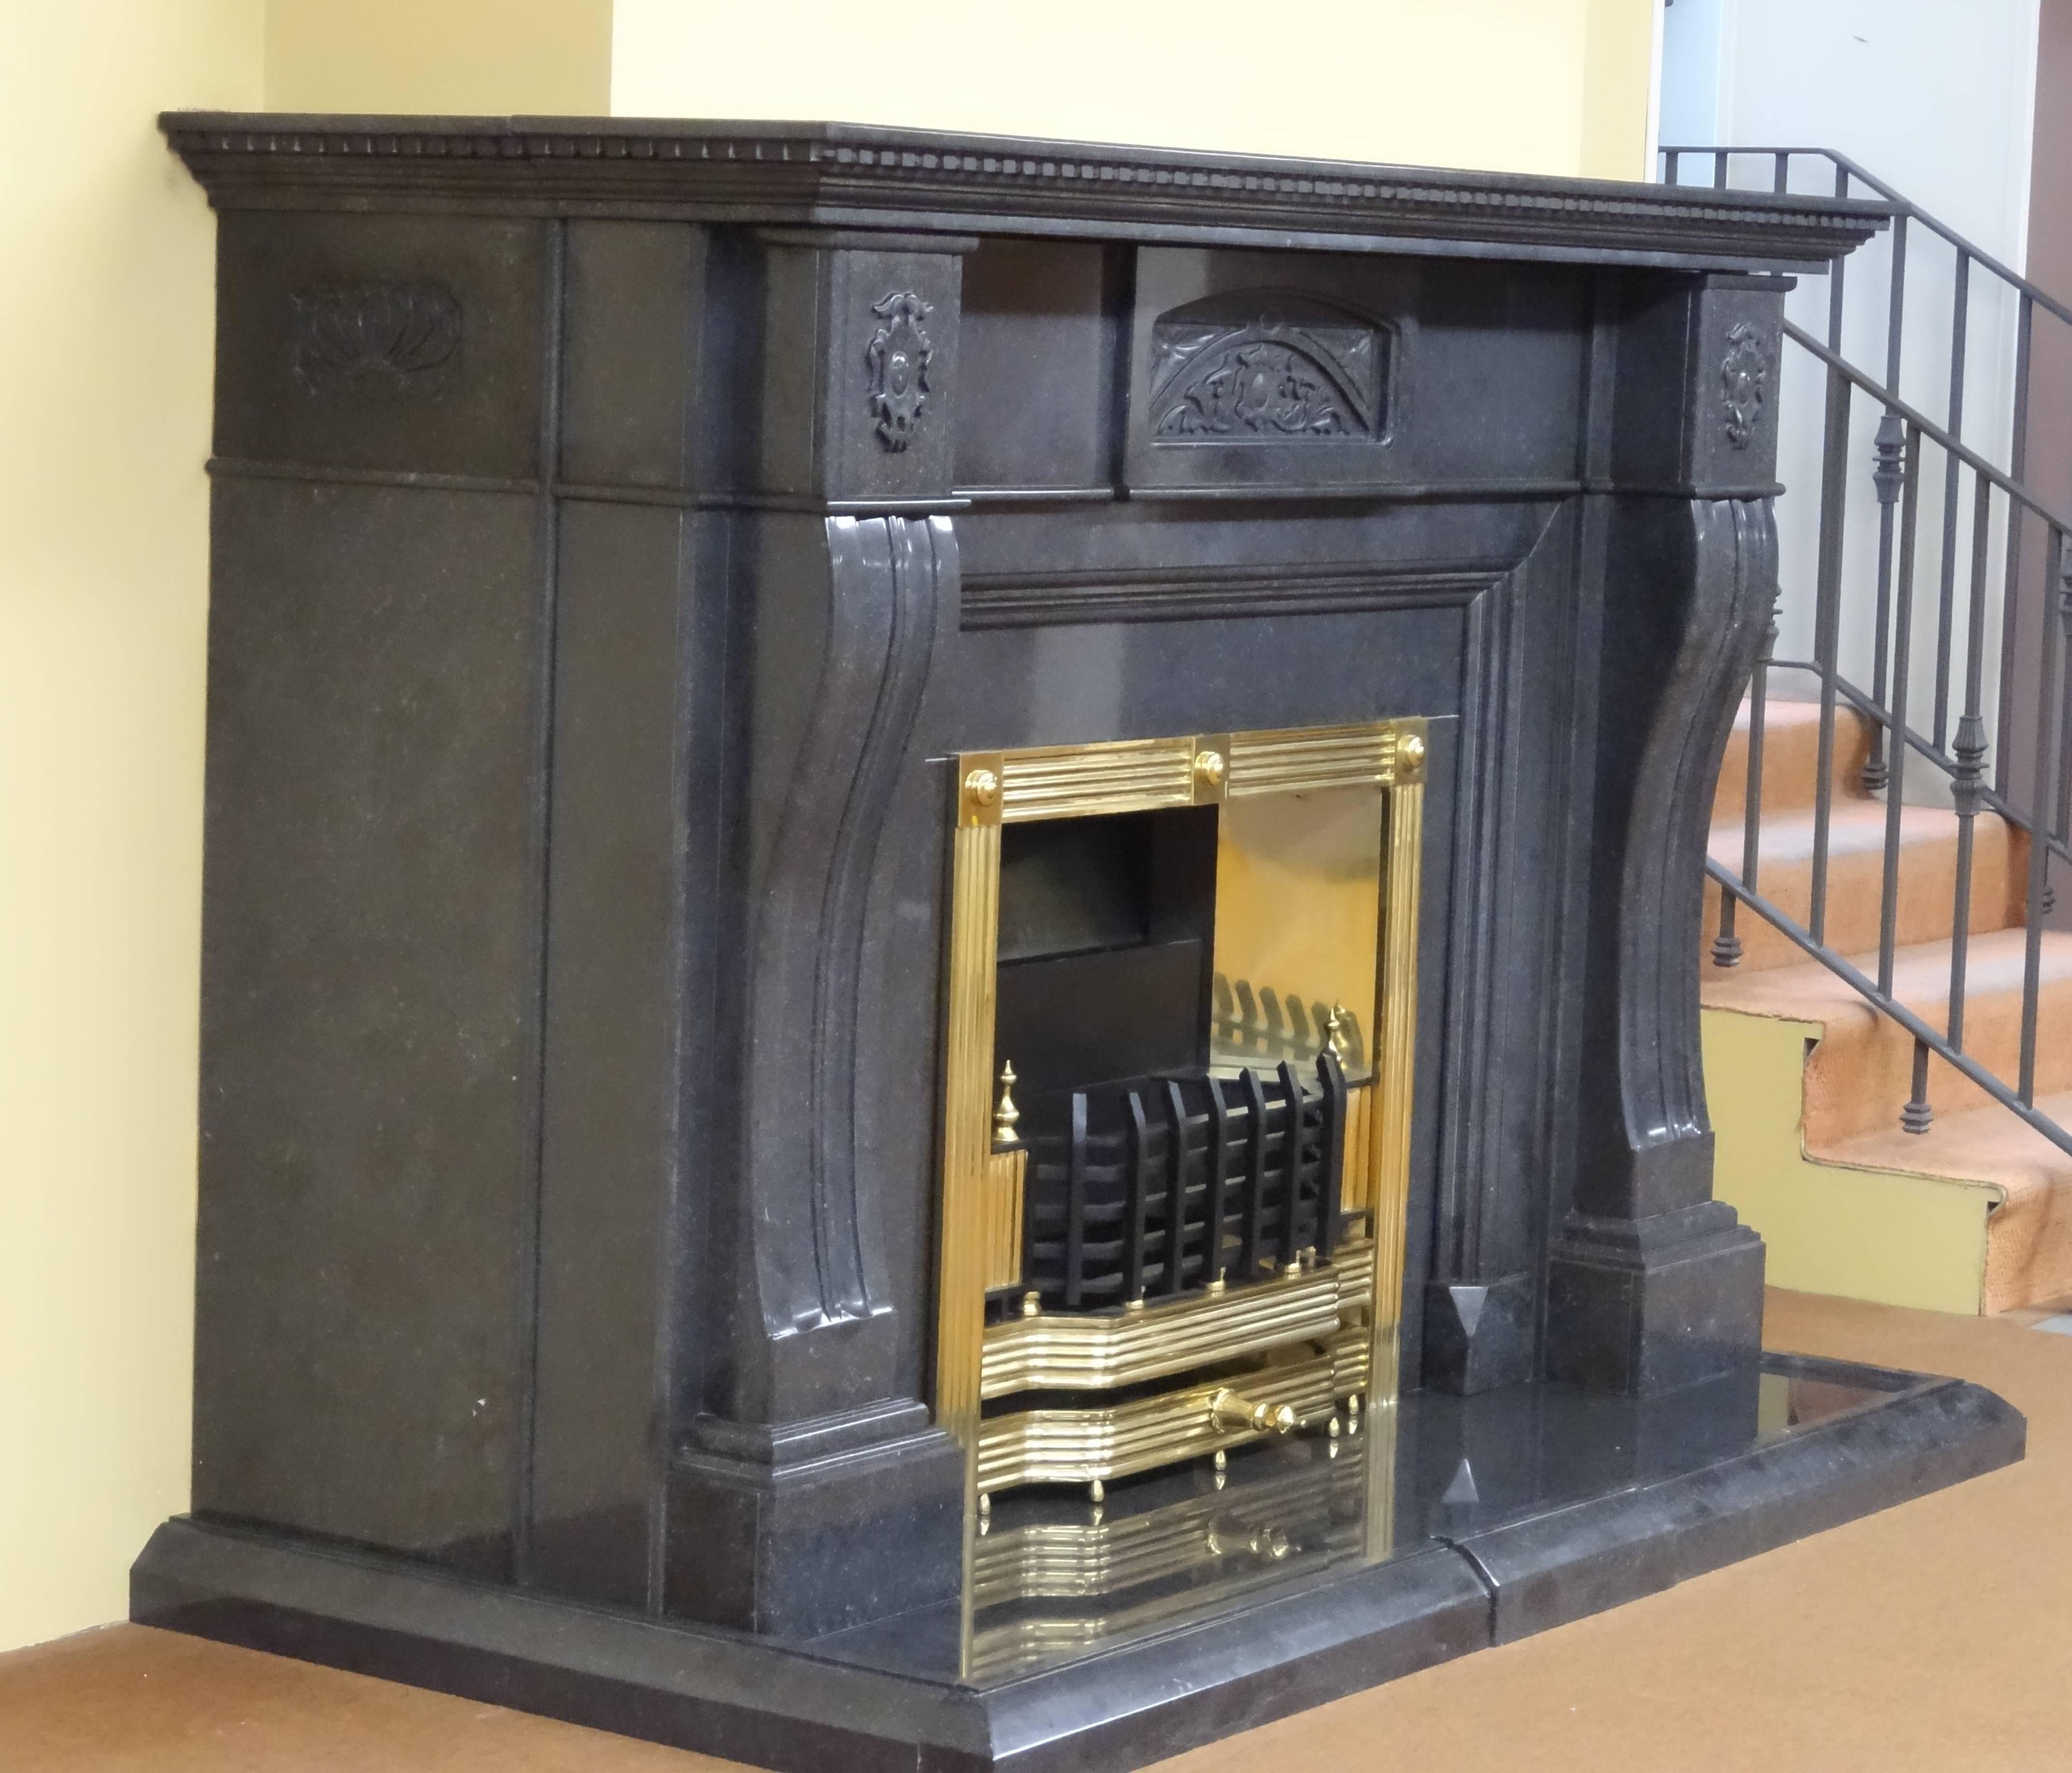 Great Britain (UK) Carved Marble Wrap Around Chimney Breast Fireplace with Brass Register Grate For Sale